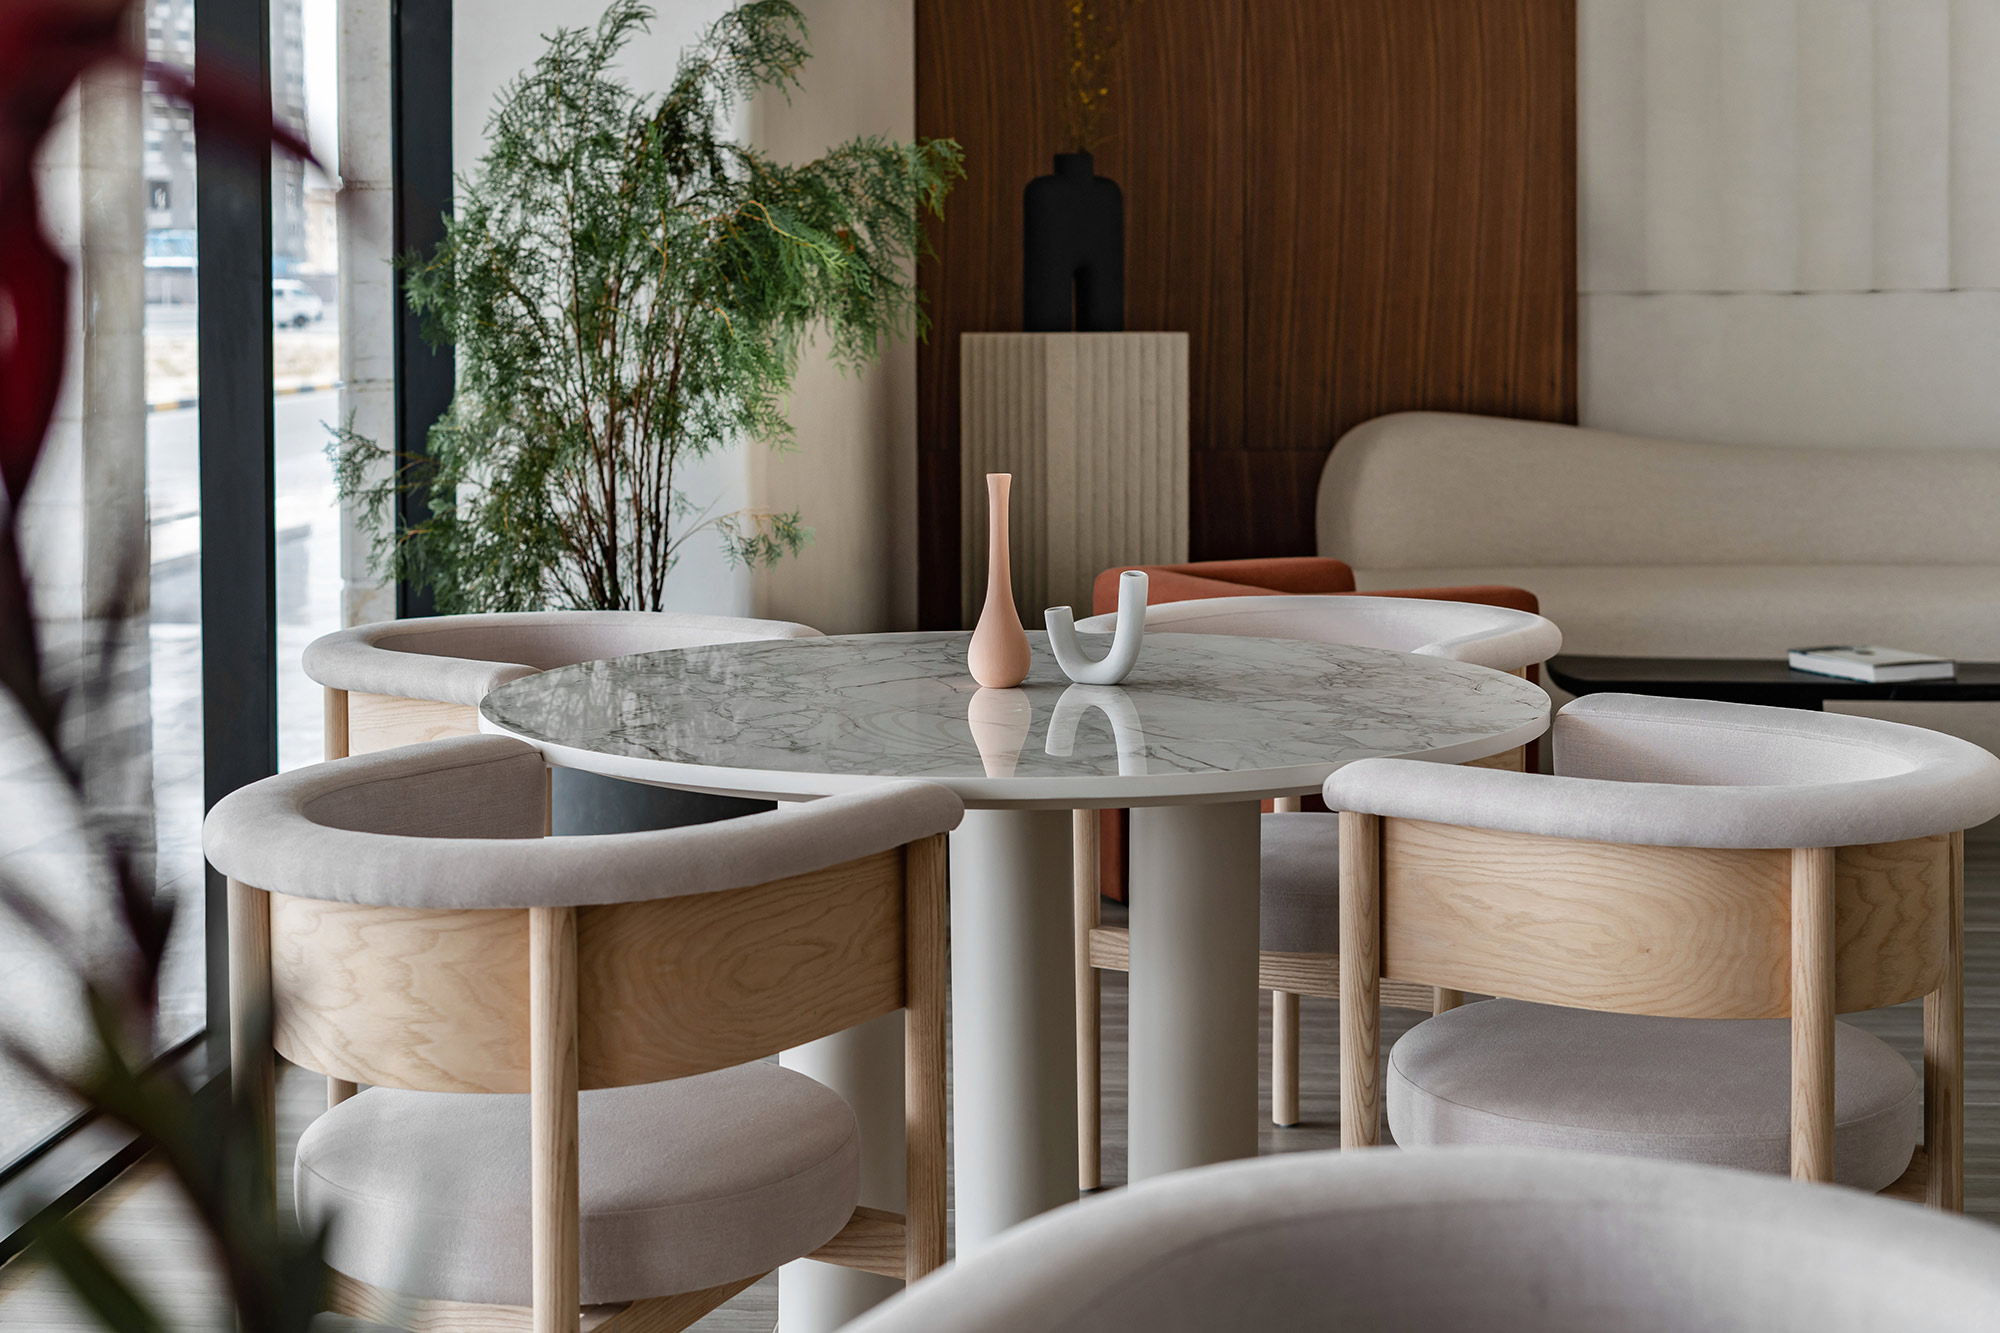 Image of The House by Cest ici Design 1 in Dekton Entzo updates and modernises luxury hotel in Sydney - Cosentino